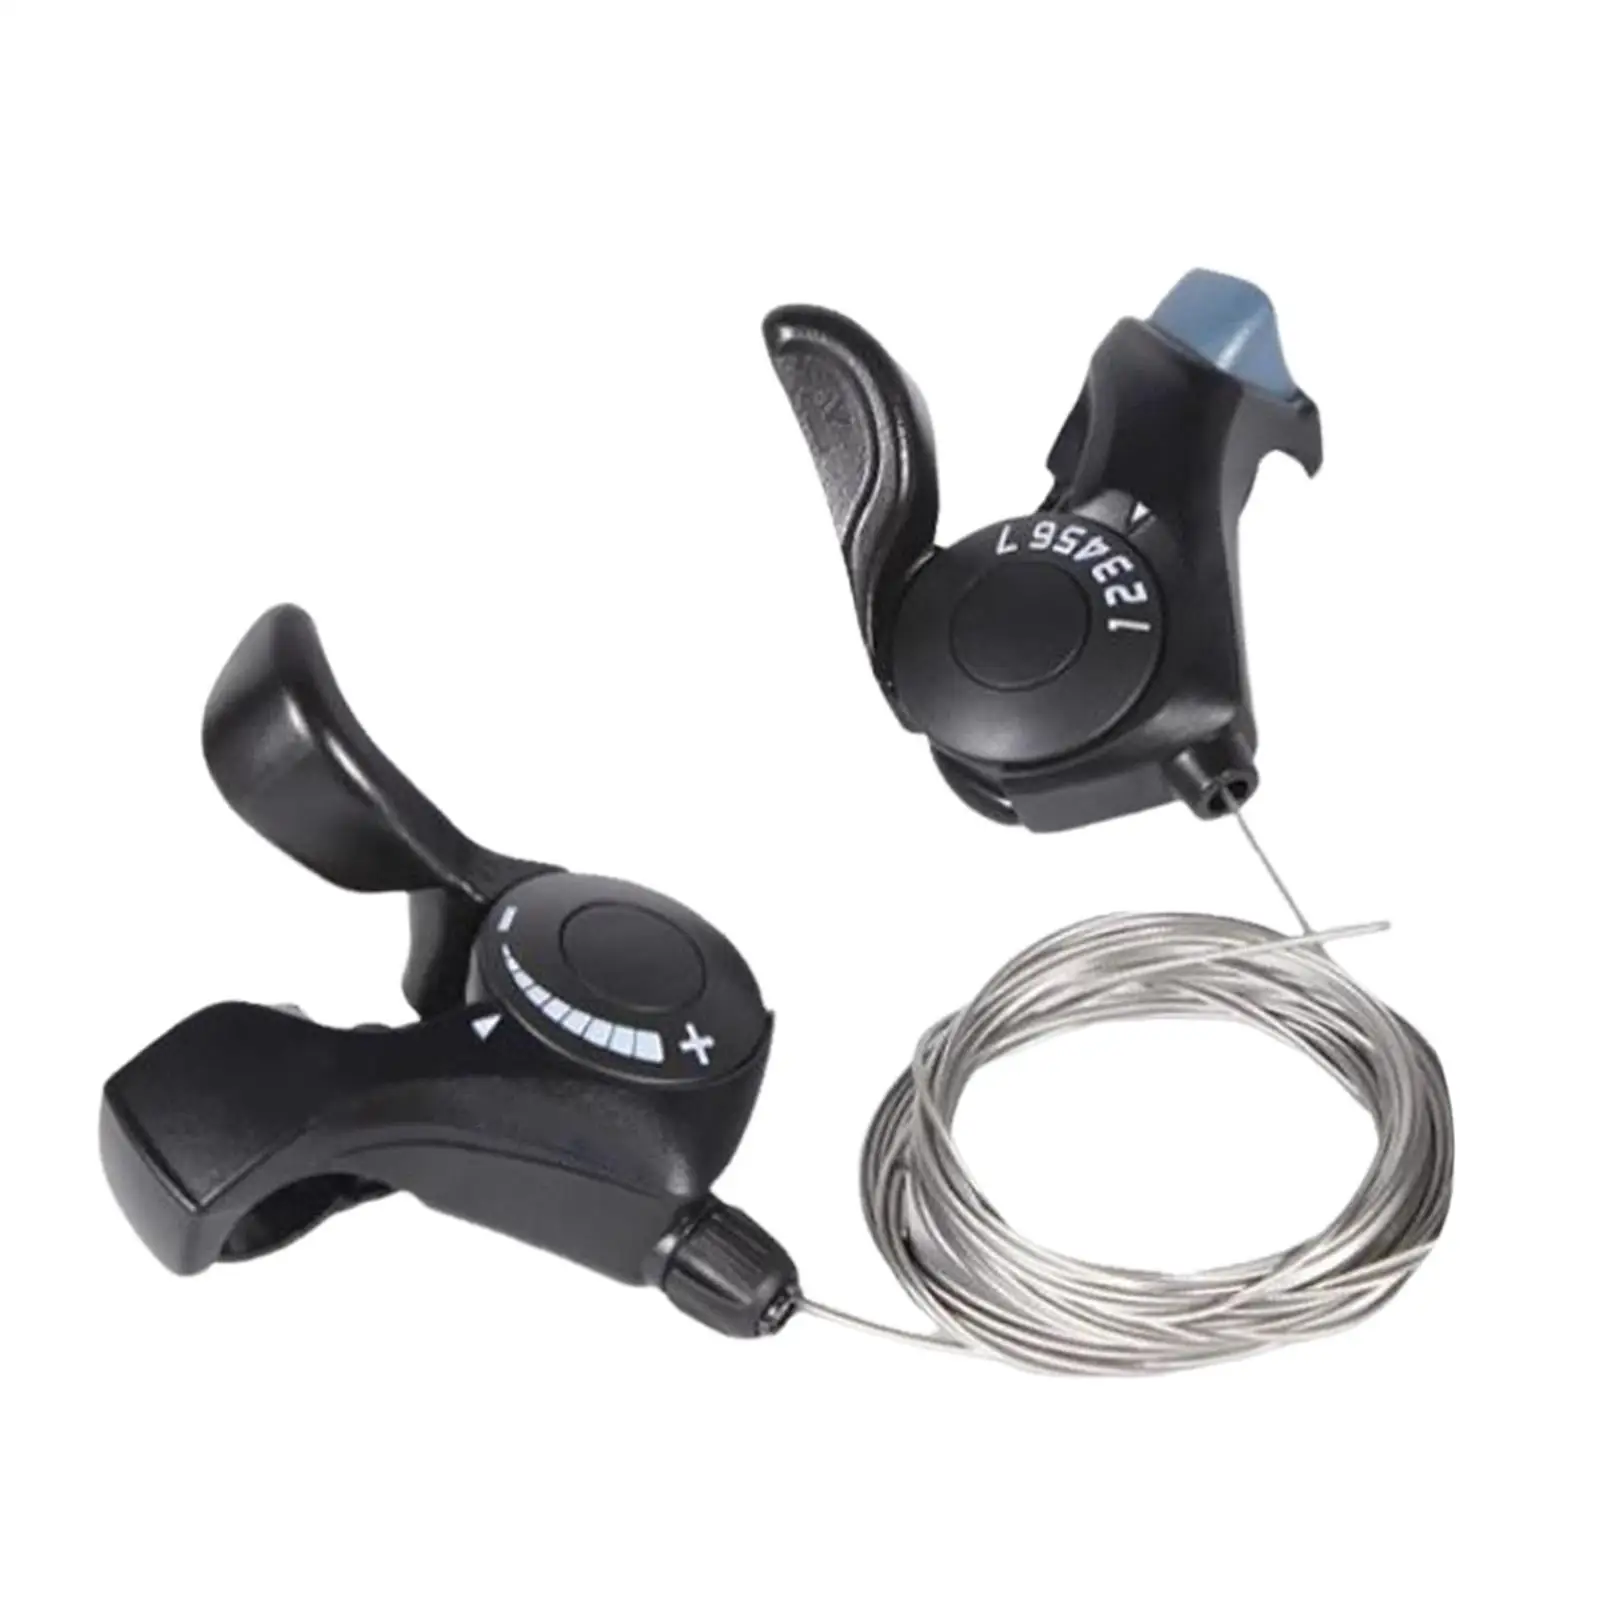 1 Pair Bike Shifters Bicycle Left Right Lever Shifter with Cables Bicycle Speed Shifter for Folding Bike Mountain Bike Tool